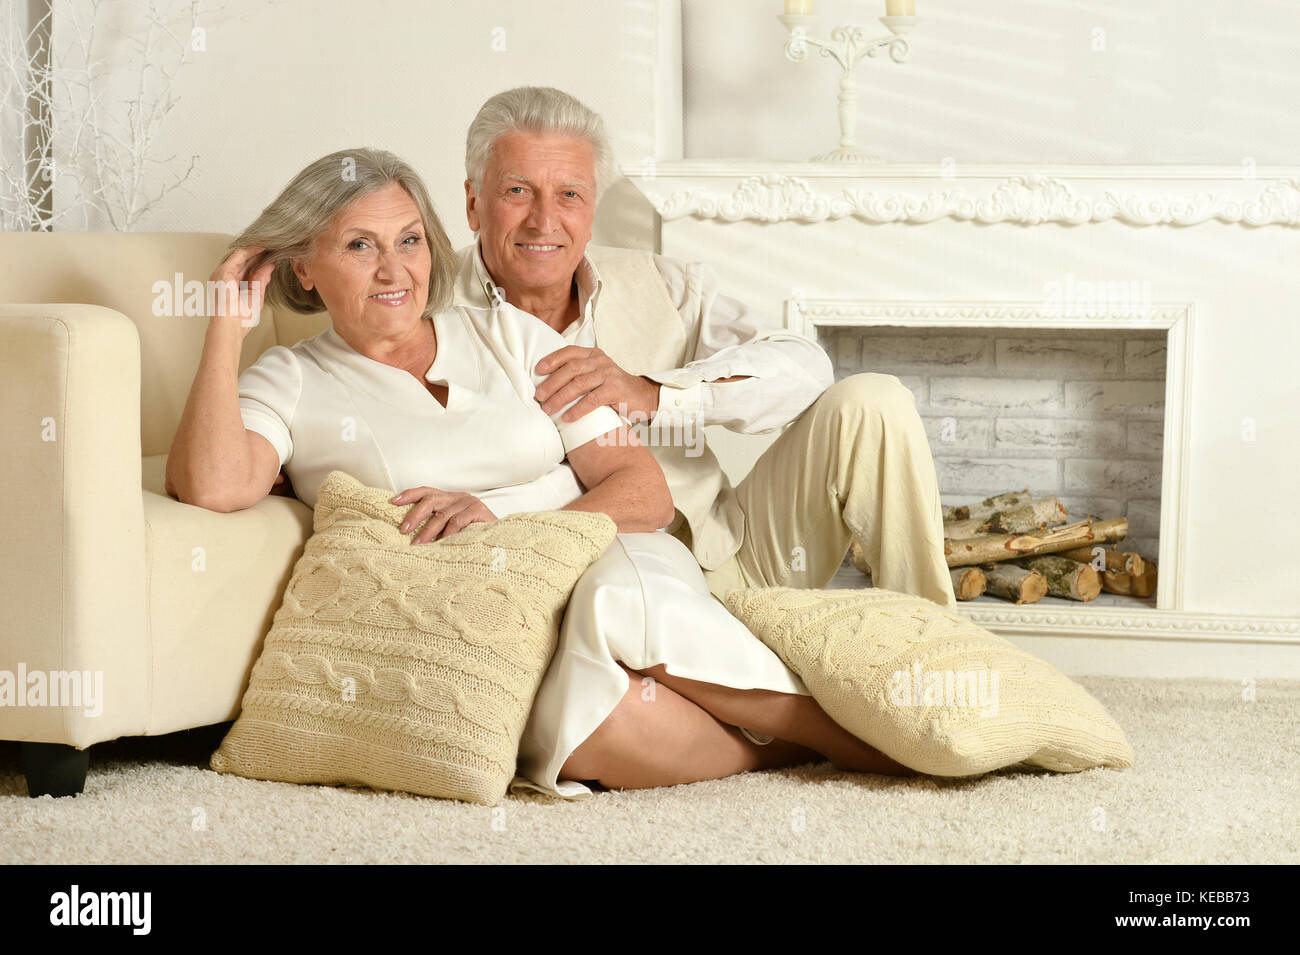 Elderly people sitting at home Stock Photo